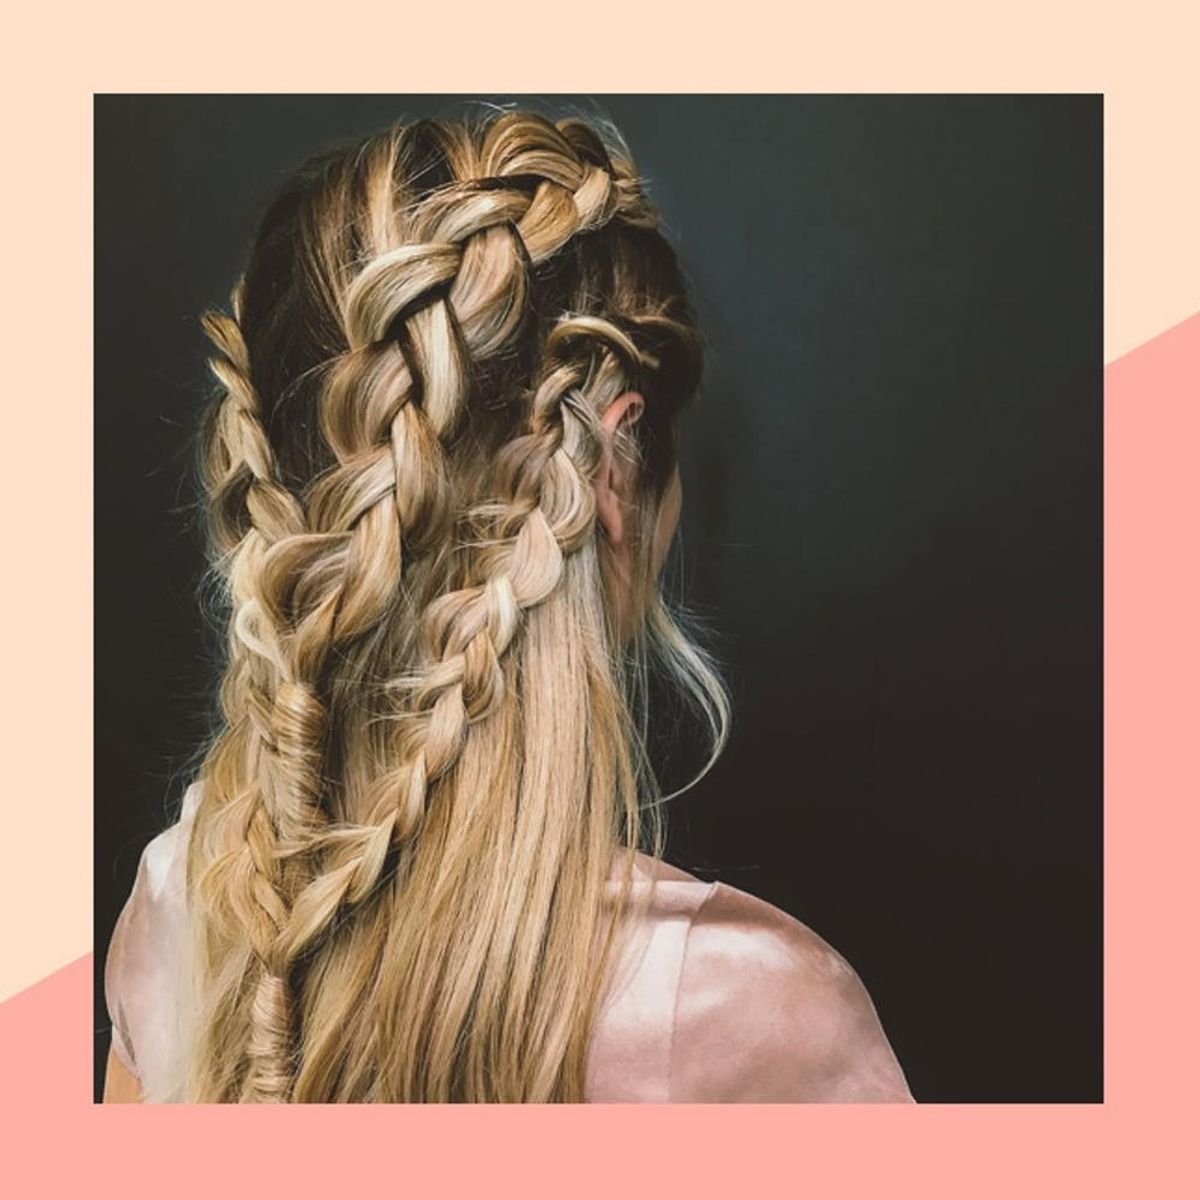 Rock the “Game of Thrones” Hairstyle With This Khaleesi Braid Tutorial